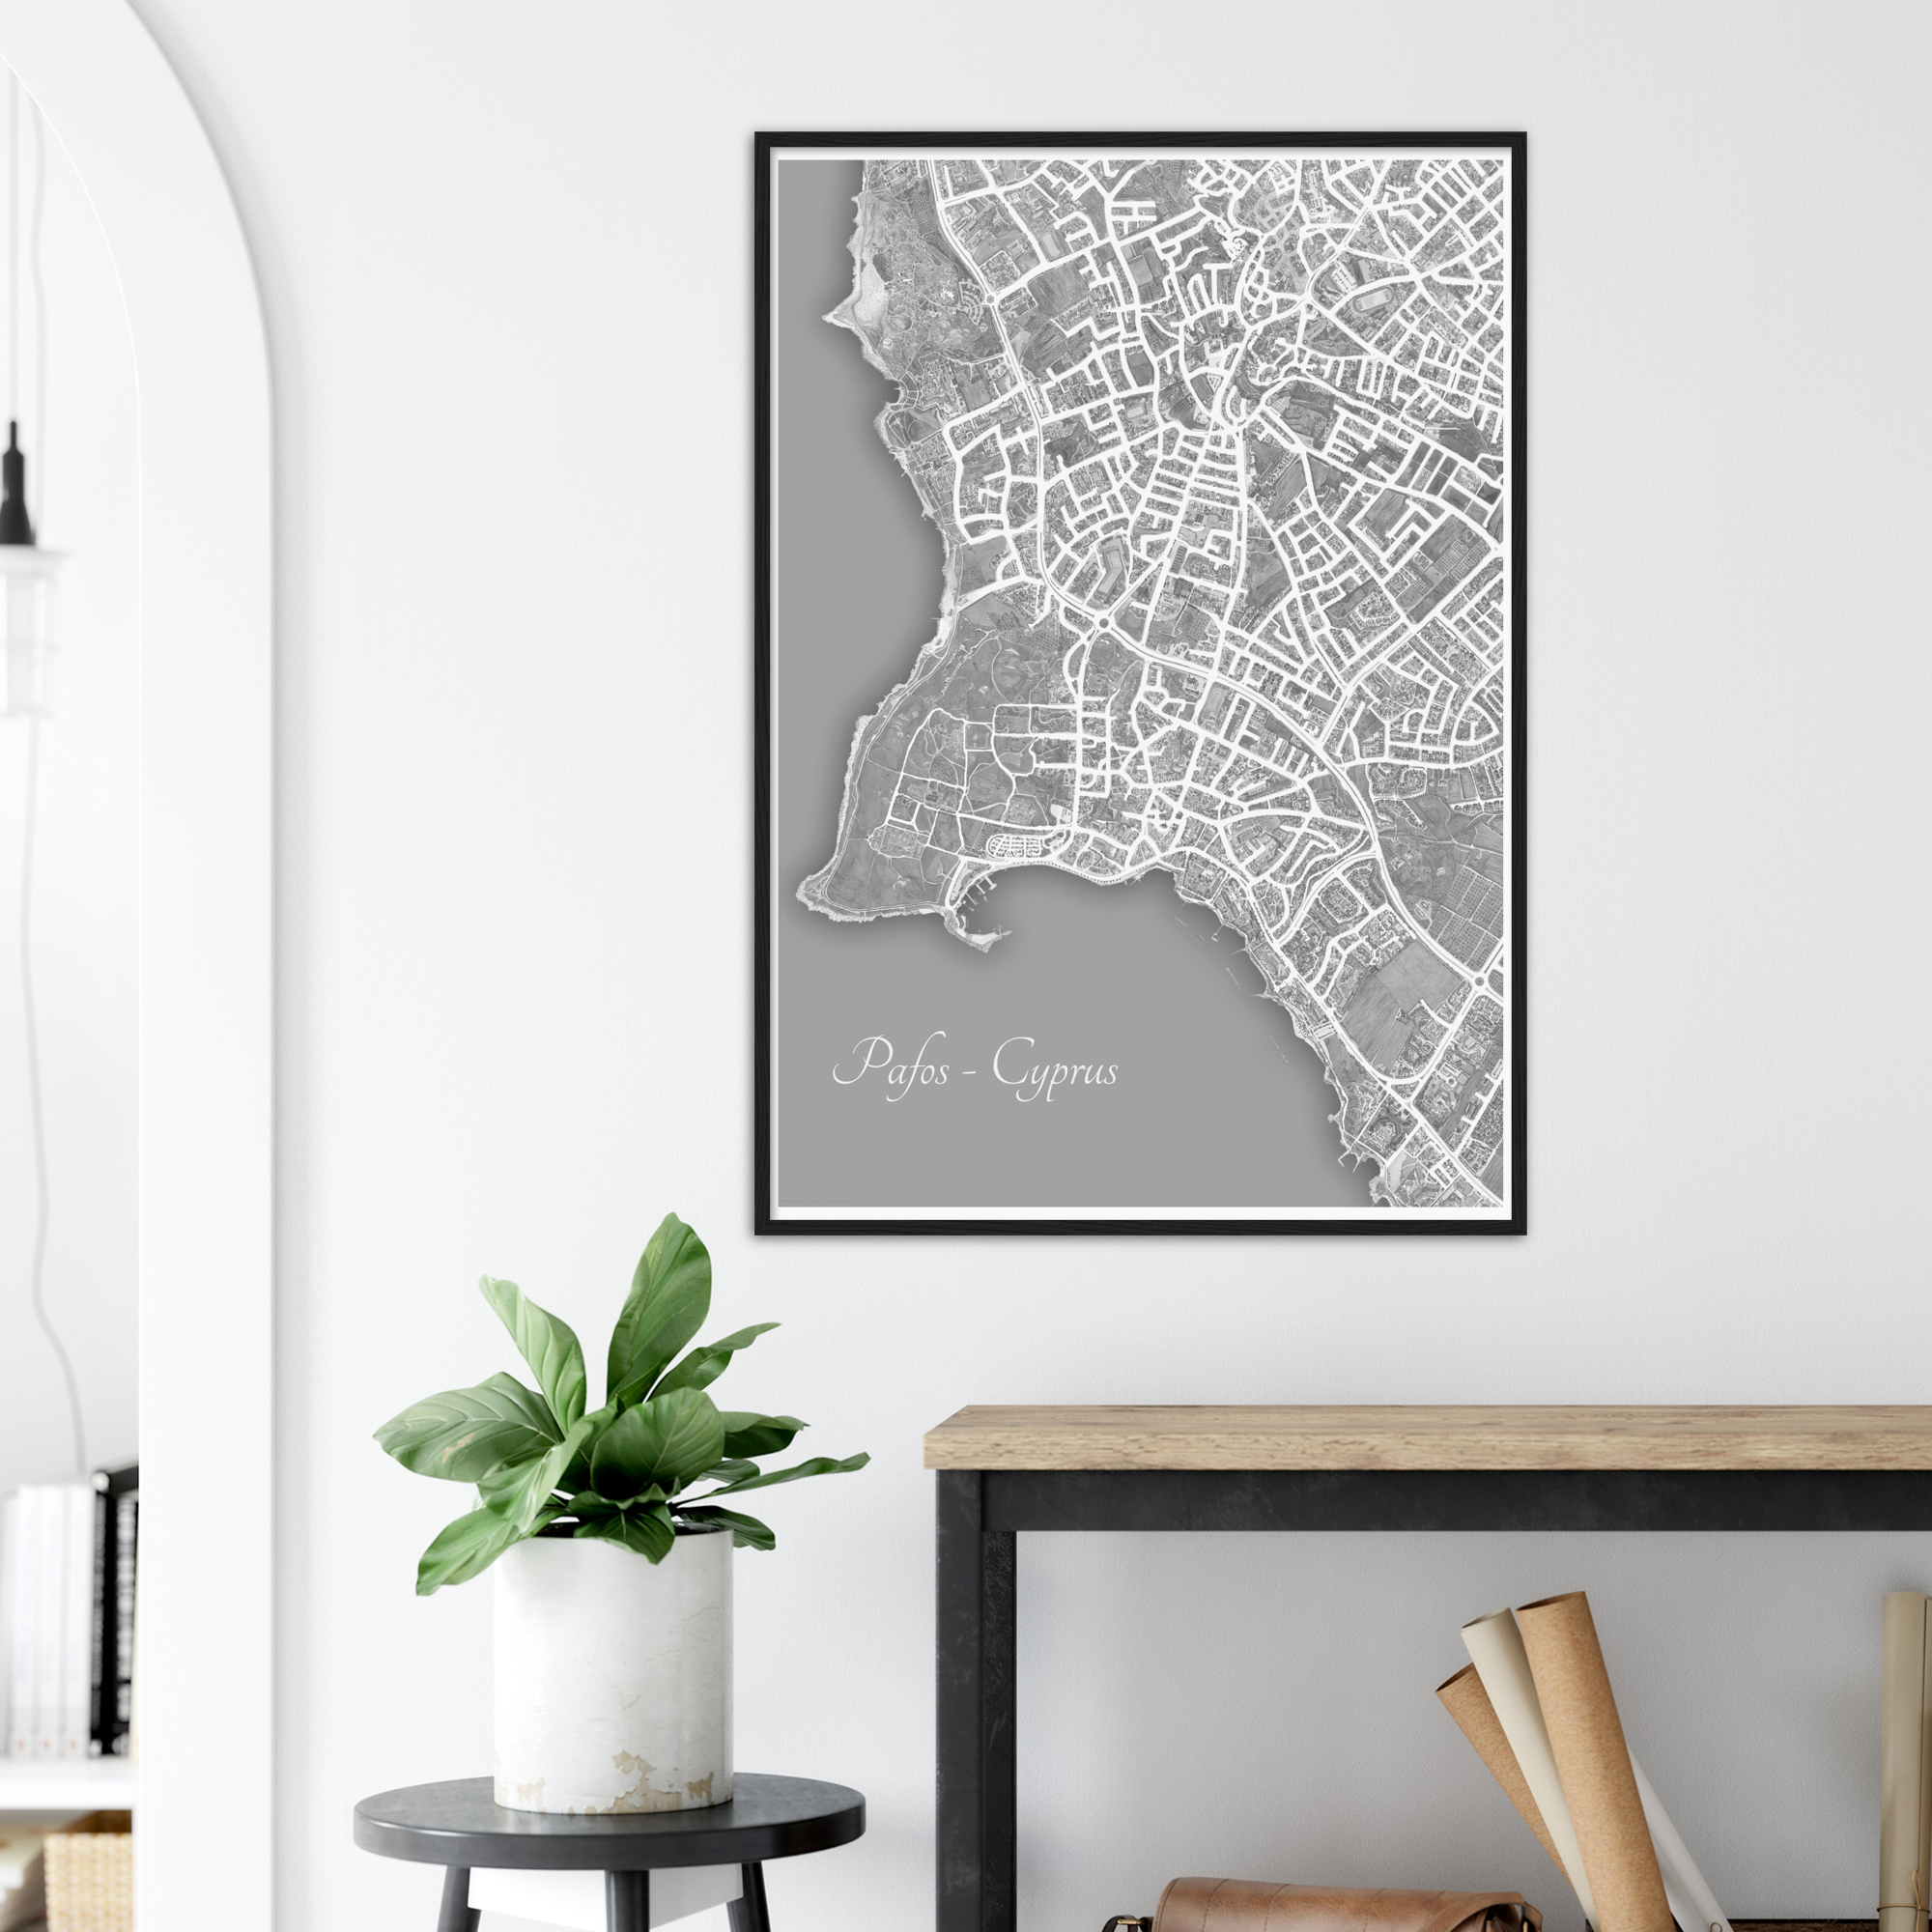 Pafos, Cyprus – Black & White Print – Wooden Framed Poster